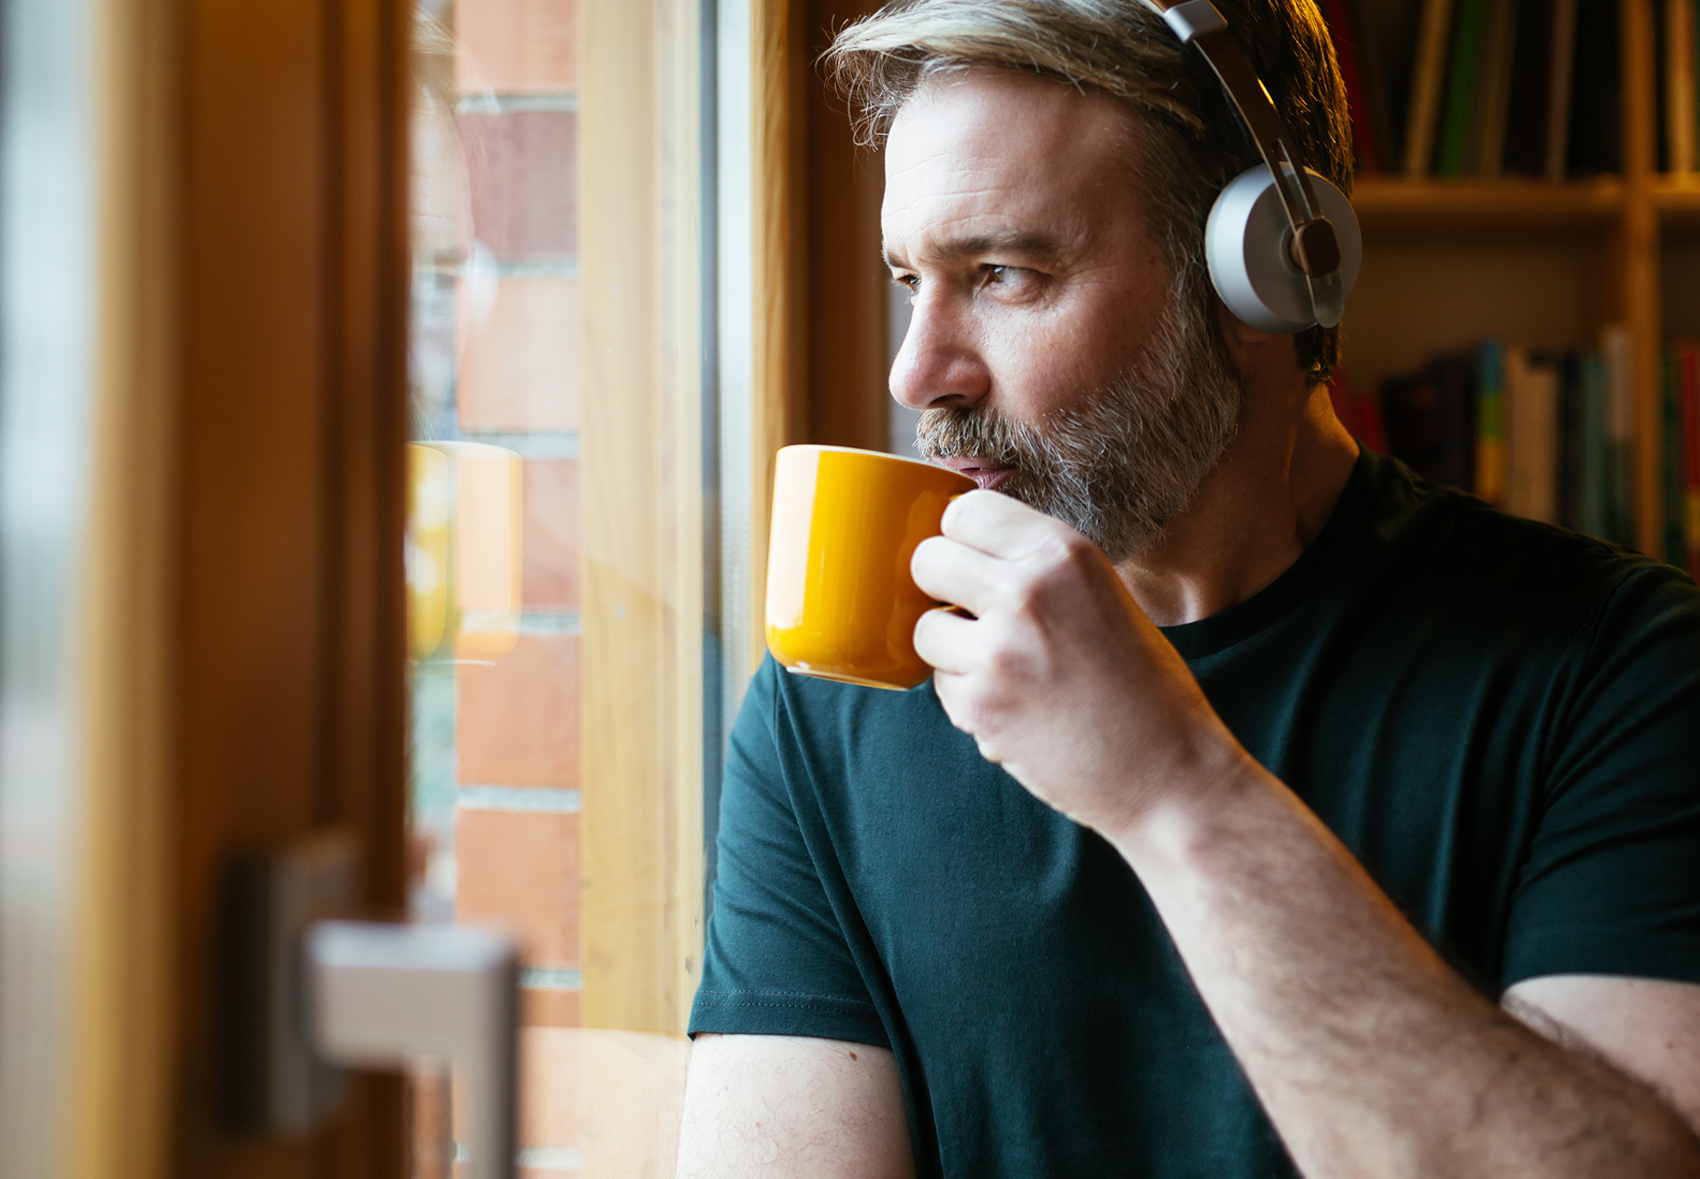 man with headphones drinking coffee and staring out a window